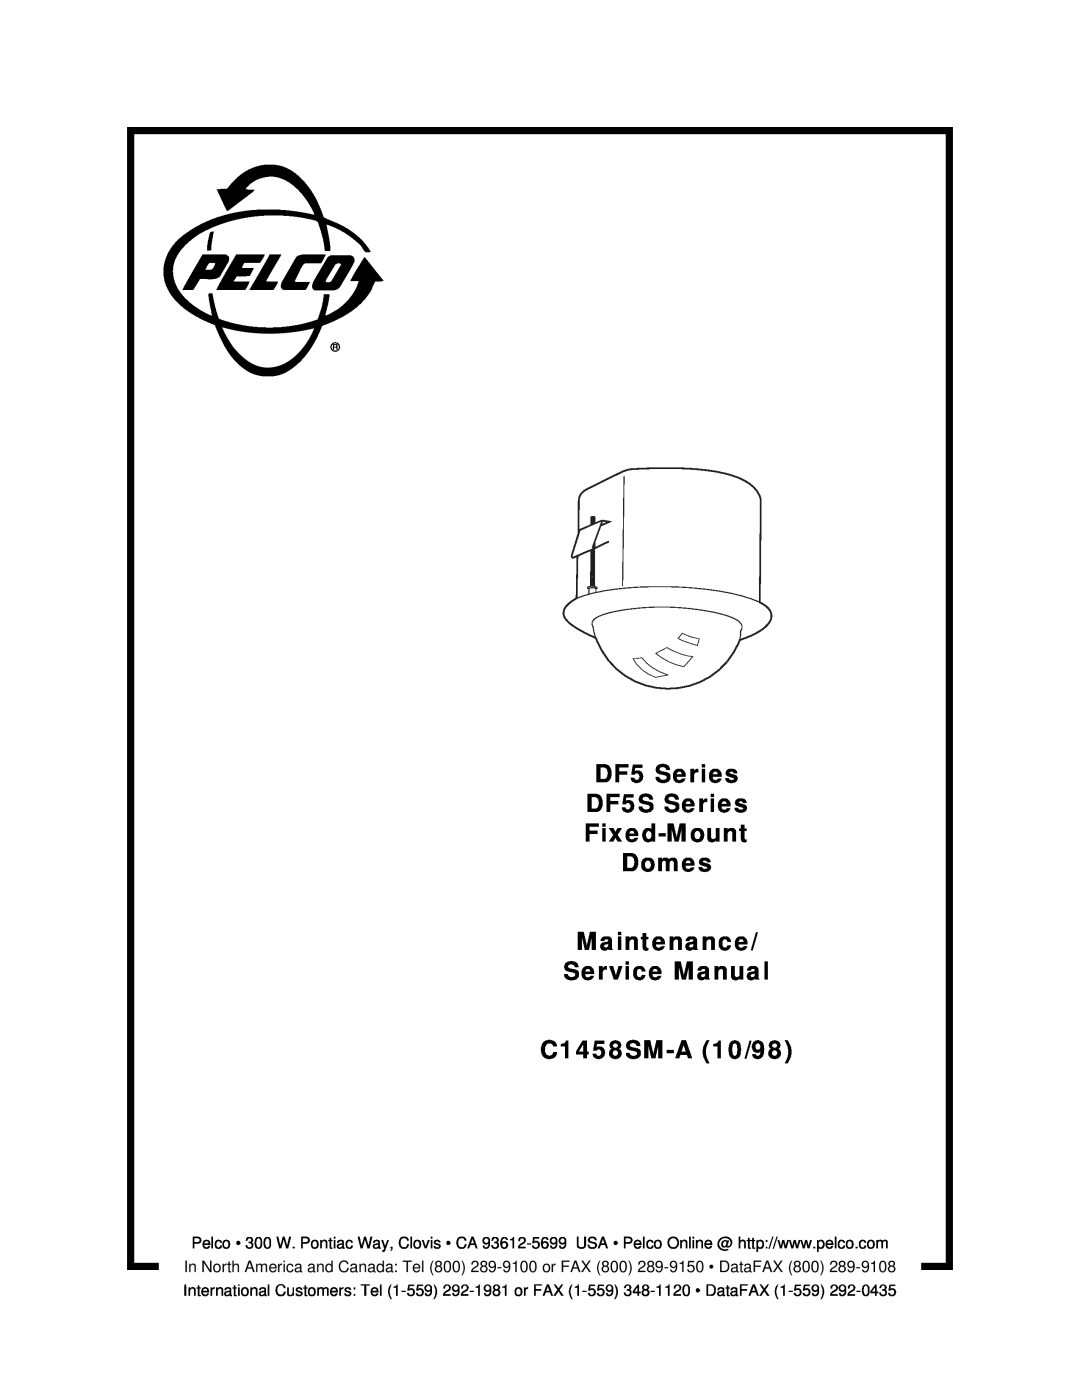 Pelco service manual DF5 Series DF5S Series Fixed-Mount Domes 